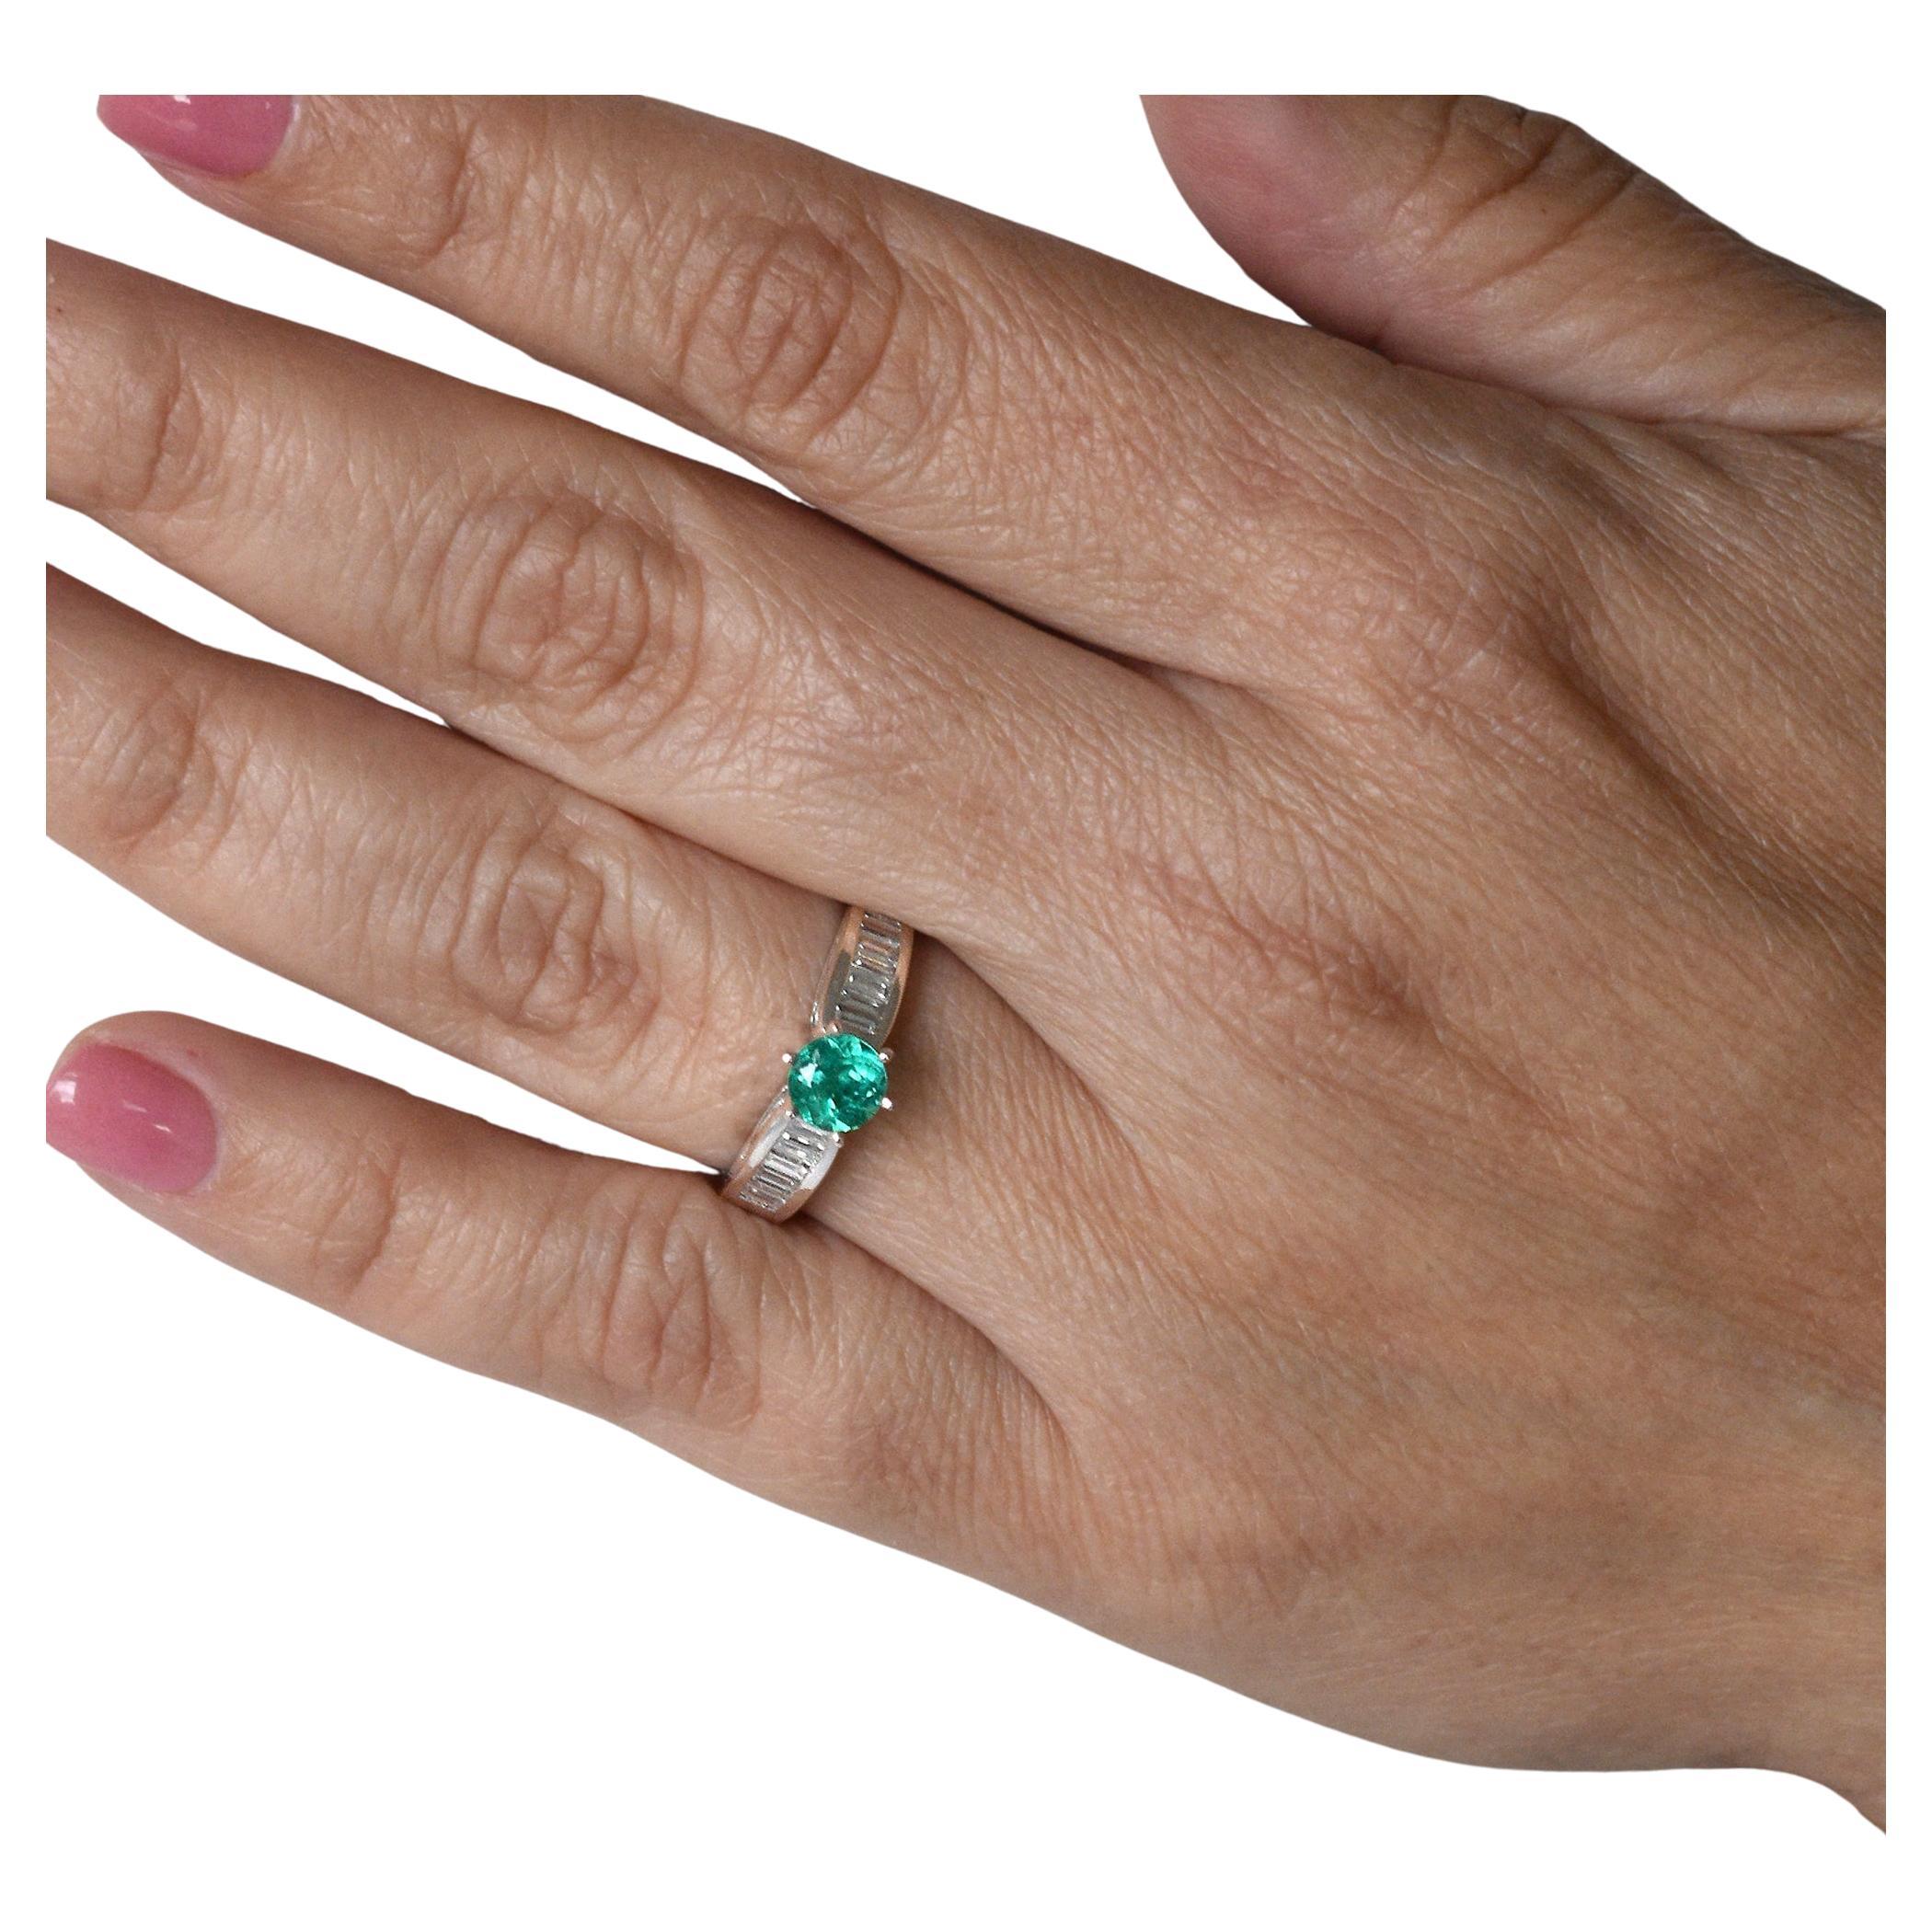 0.66 Carats Emerald Engagement Ring in White Gold With Baguette Cut Diamonds For Sale